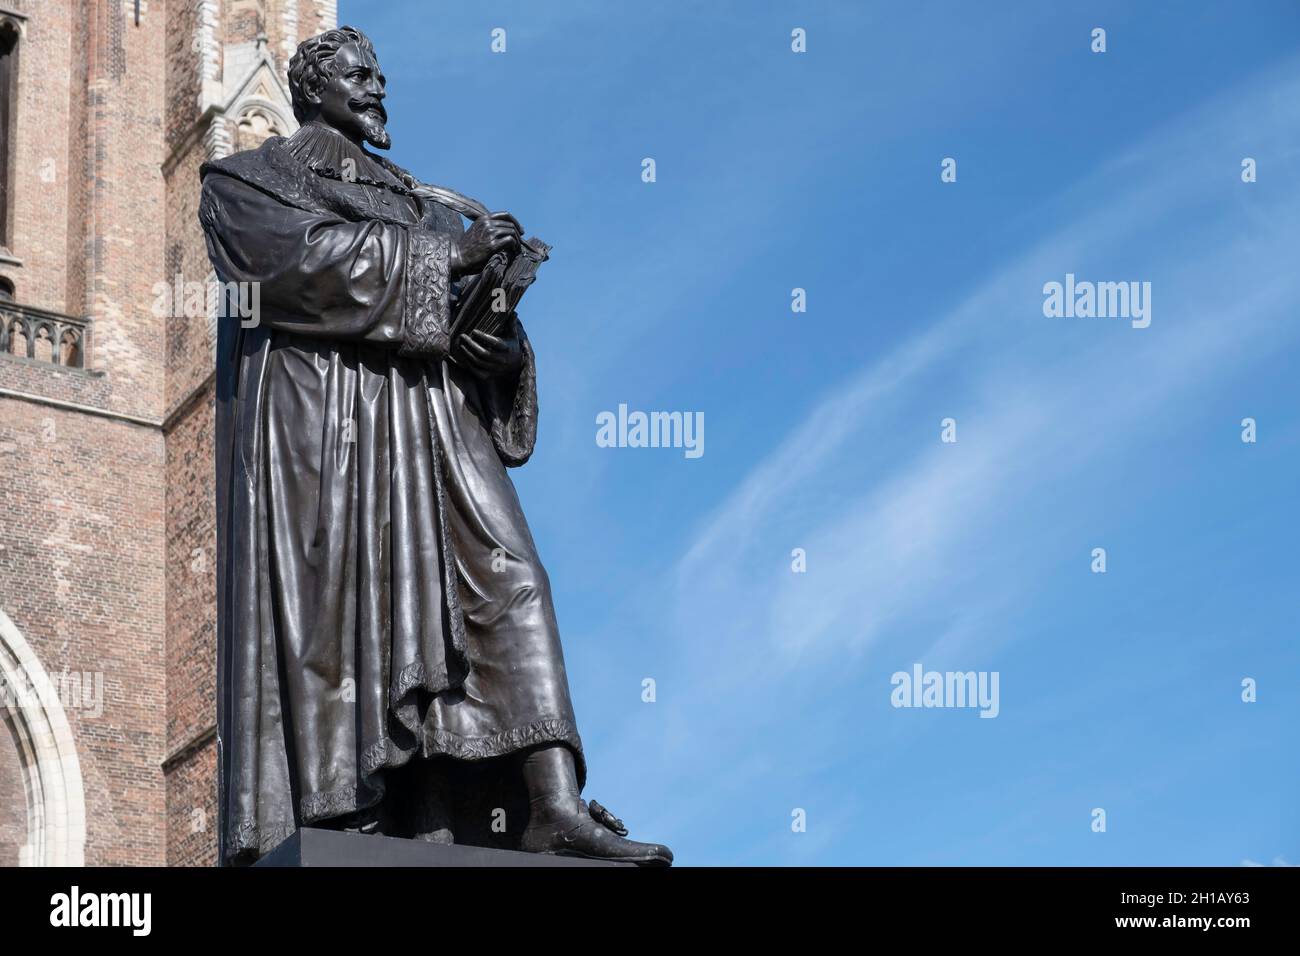 Statue of the jurist, statesman and Remonstrant leader Hugo de Groot (Hugo Grotius) in front of the entrance of the Nieuwe Kerk in Delft Stock Photo